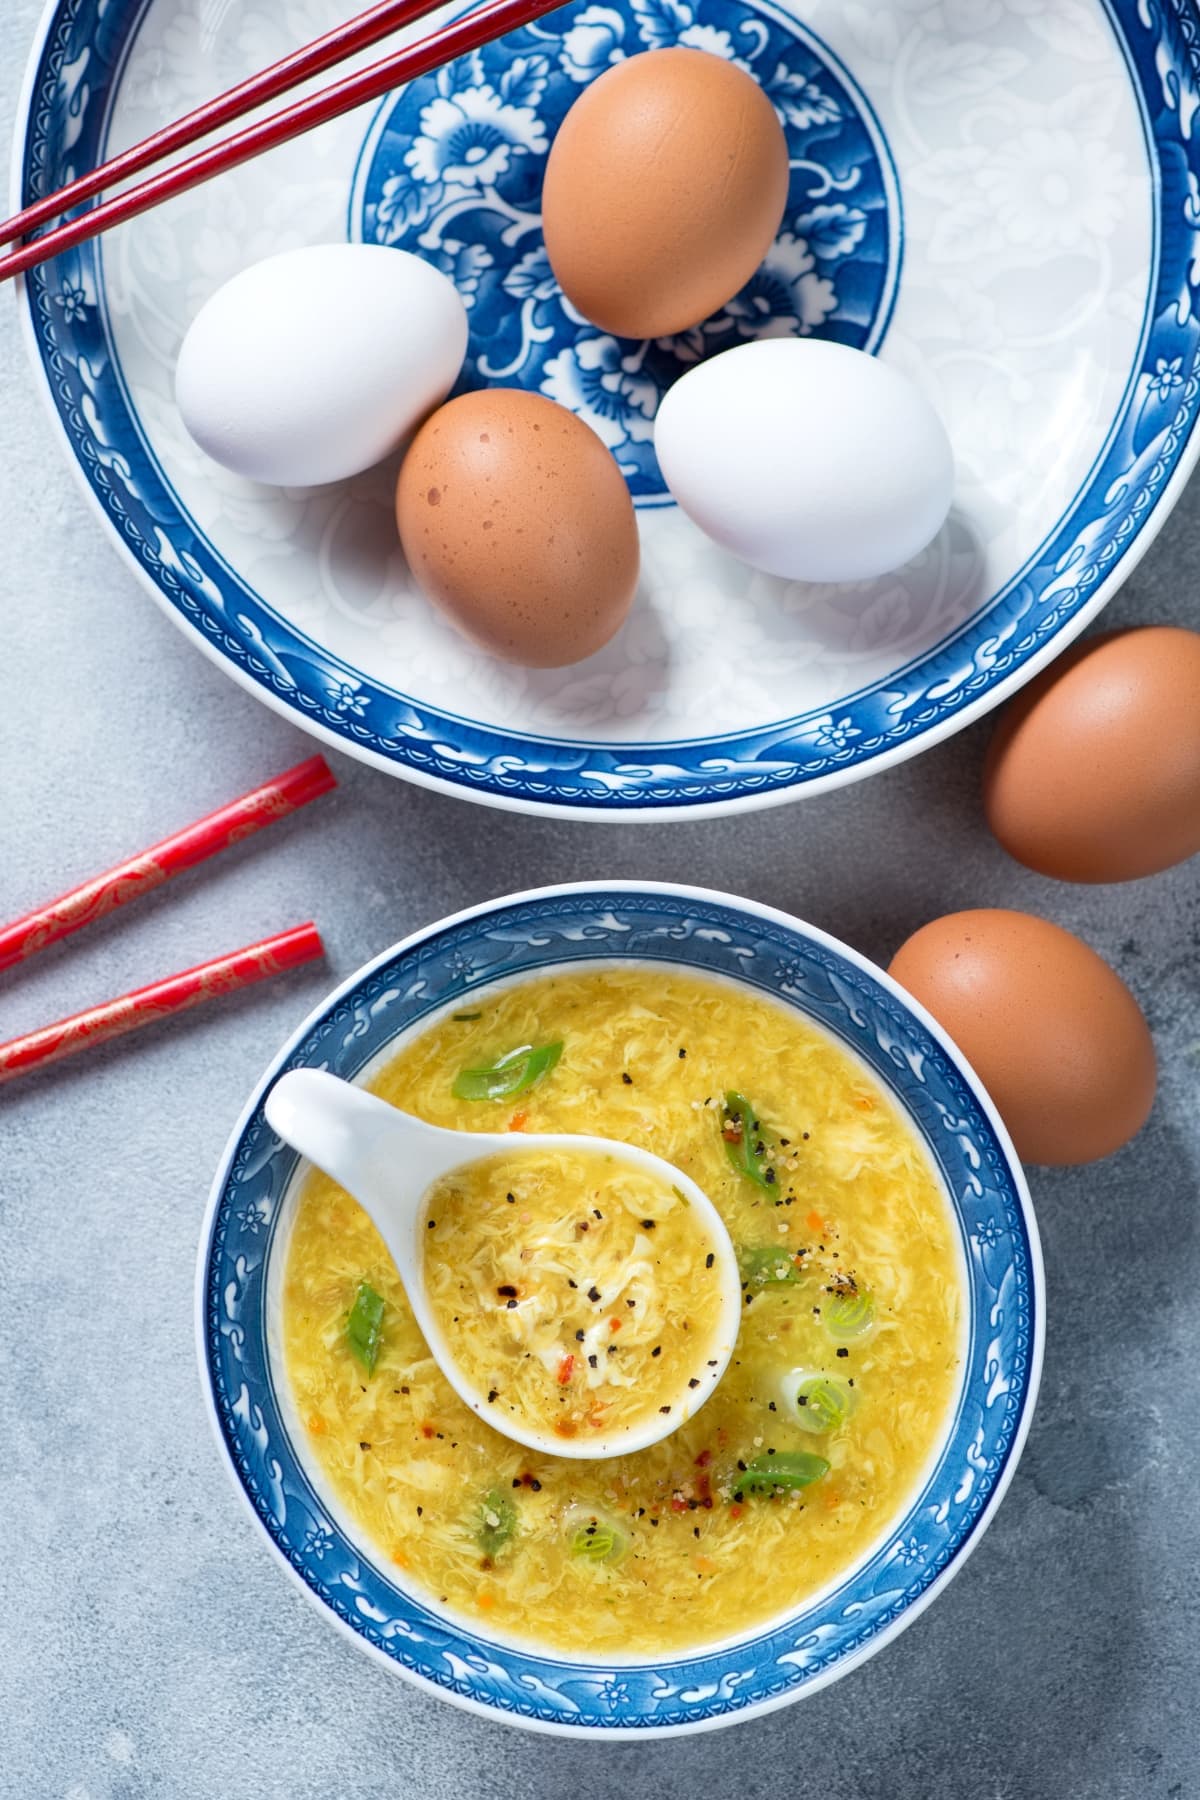 Raw brown and white eggs on a plate and a bowl of egg drop soup served in a bowl. 